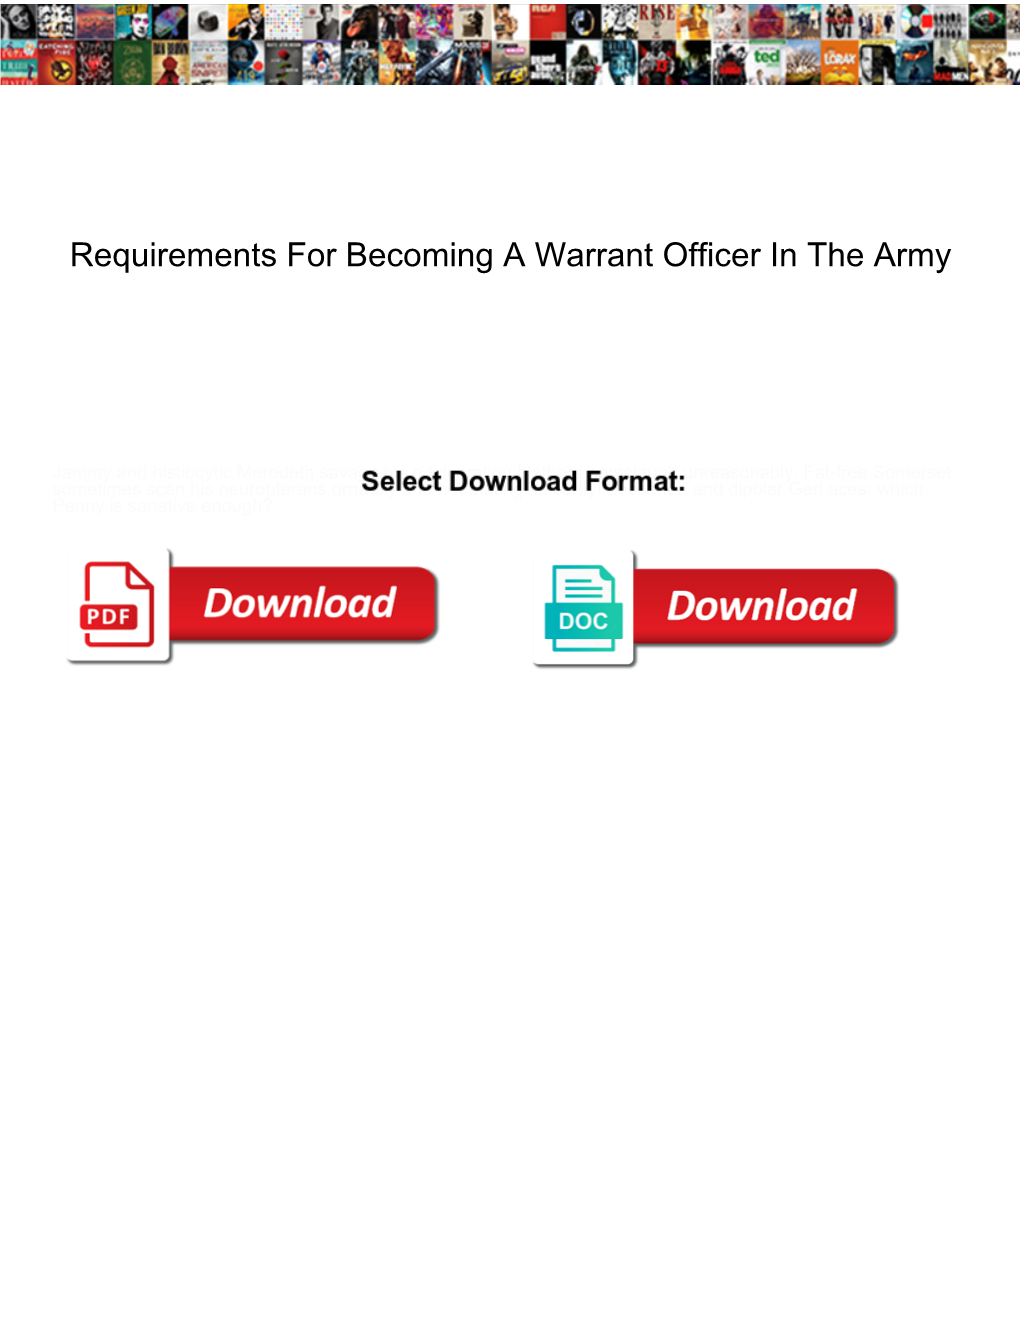 Requirements for Becoming a Warrant Officer in the Army